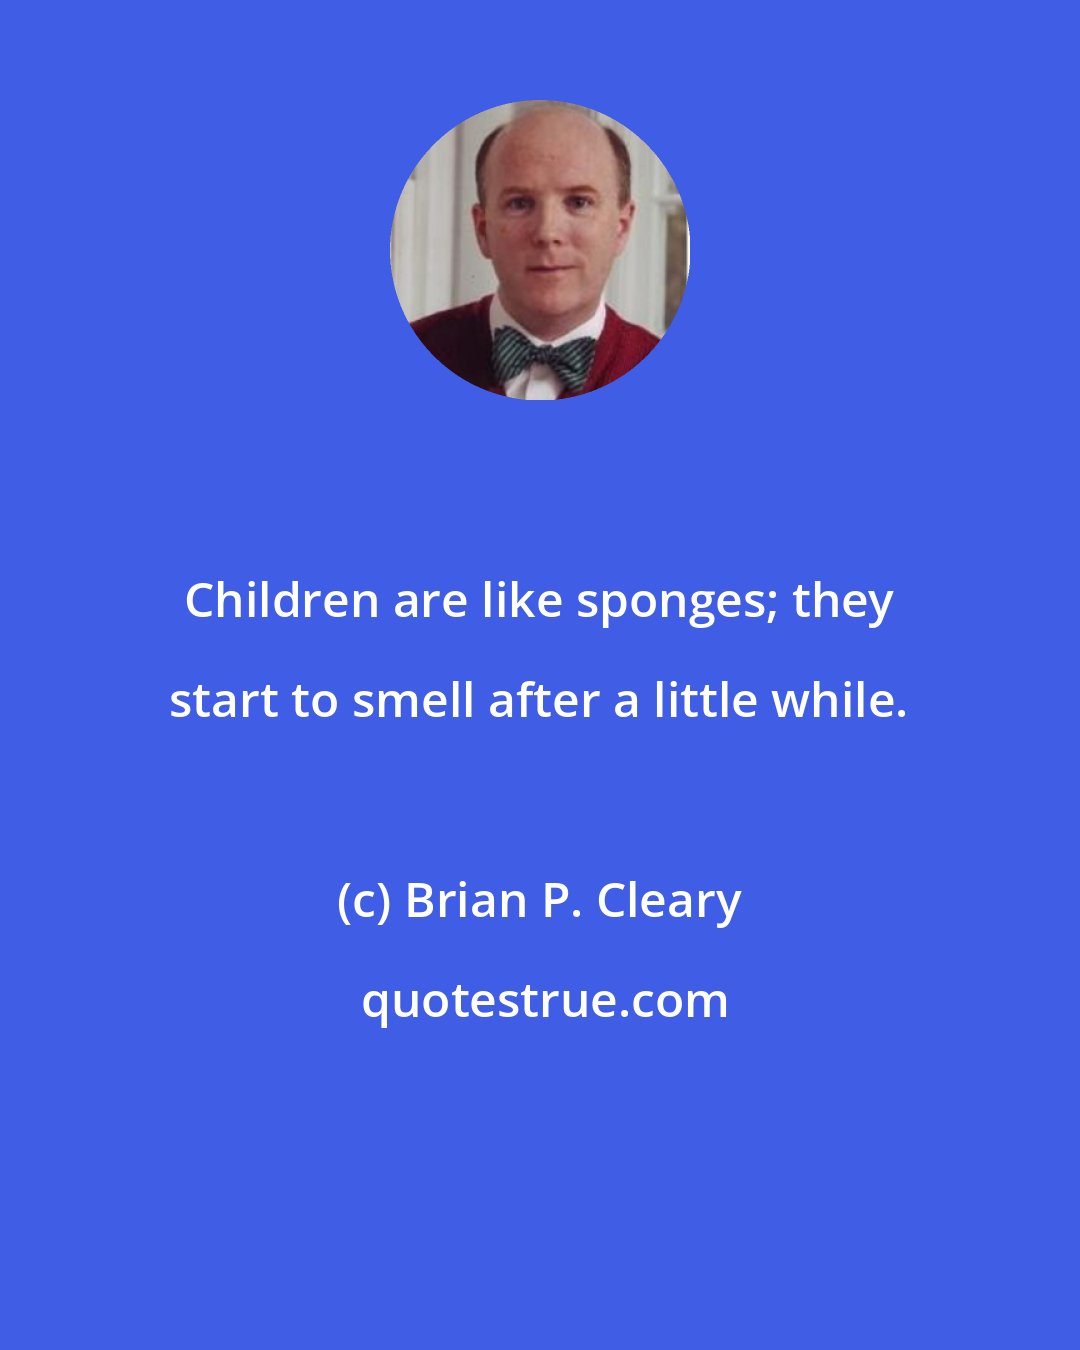 Brian P. Cleary: Children are like sponges; they start to smell after a little while.